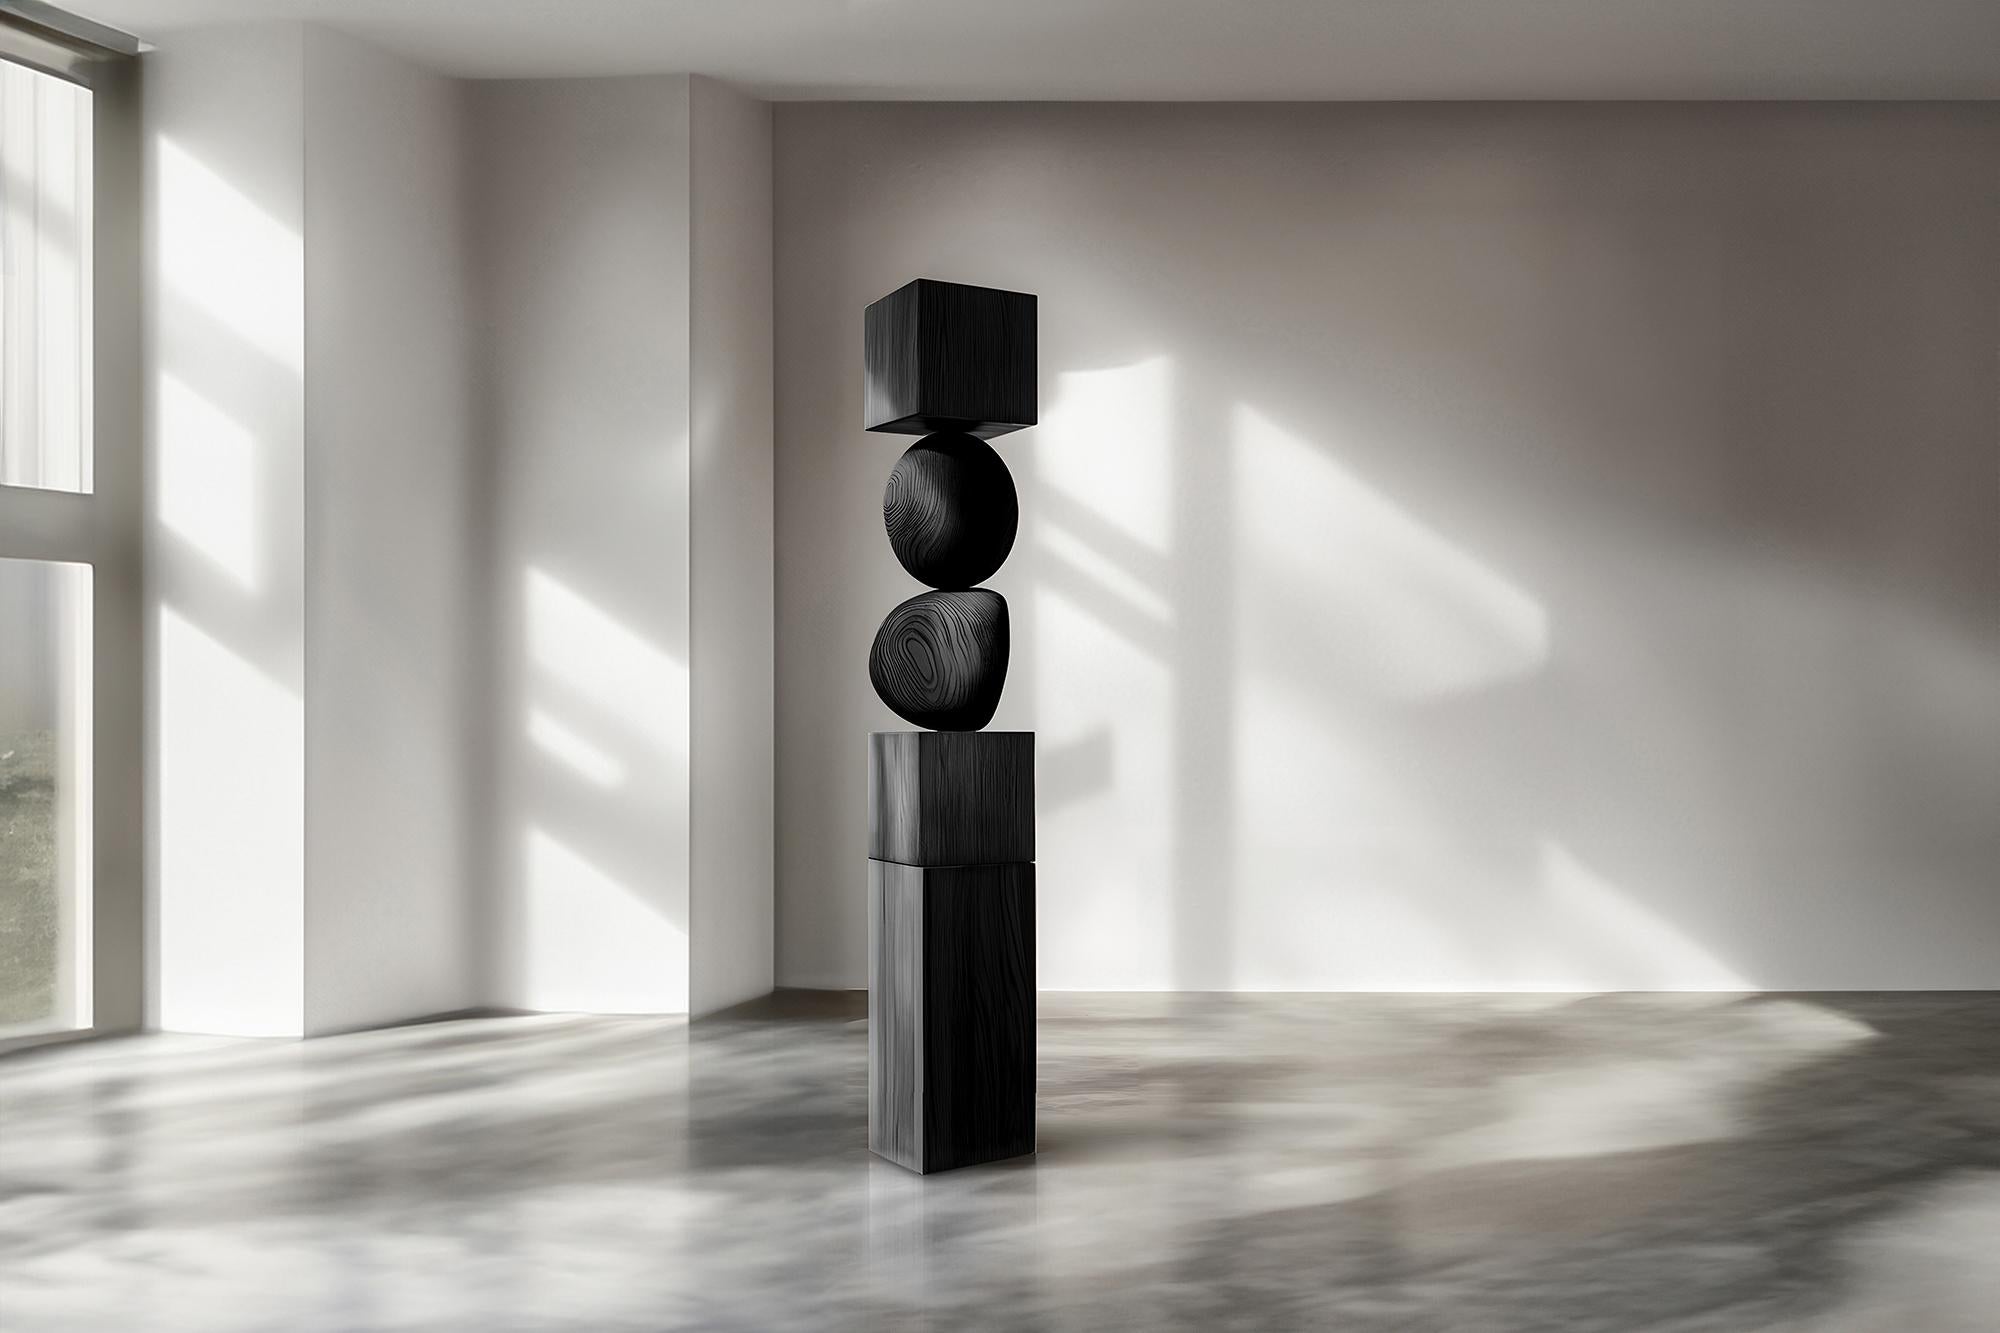 Joel Escalona's Creation, Dark Black Solid Wood Totem, Still Stand No84
——

Joel Escalona's wooden standing sculptures are objects of raw beauty and serene grace. Each one is a testament to the power of the material, with smooth curves that flow